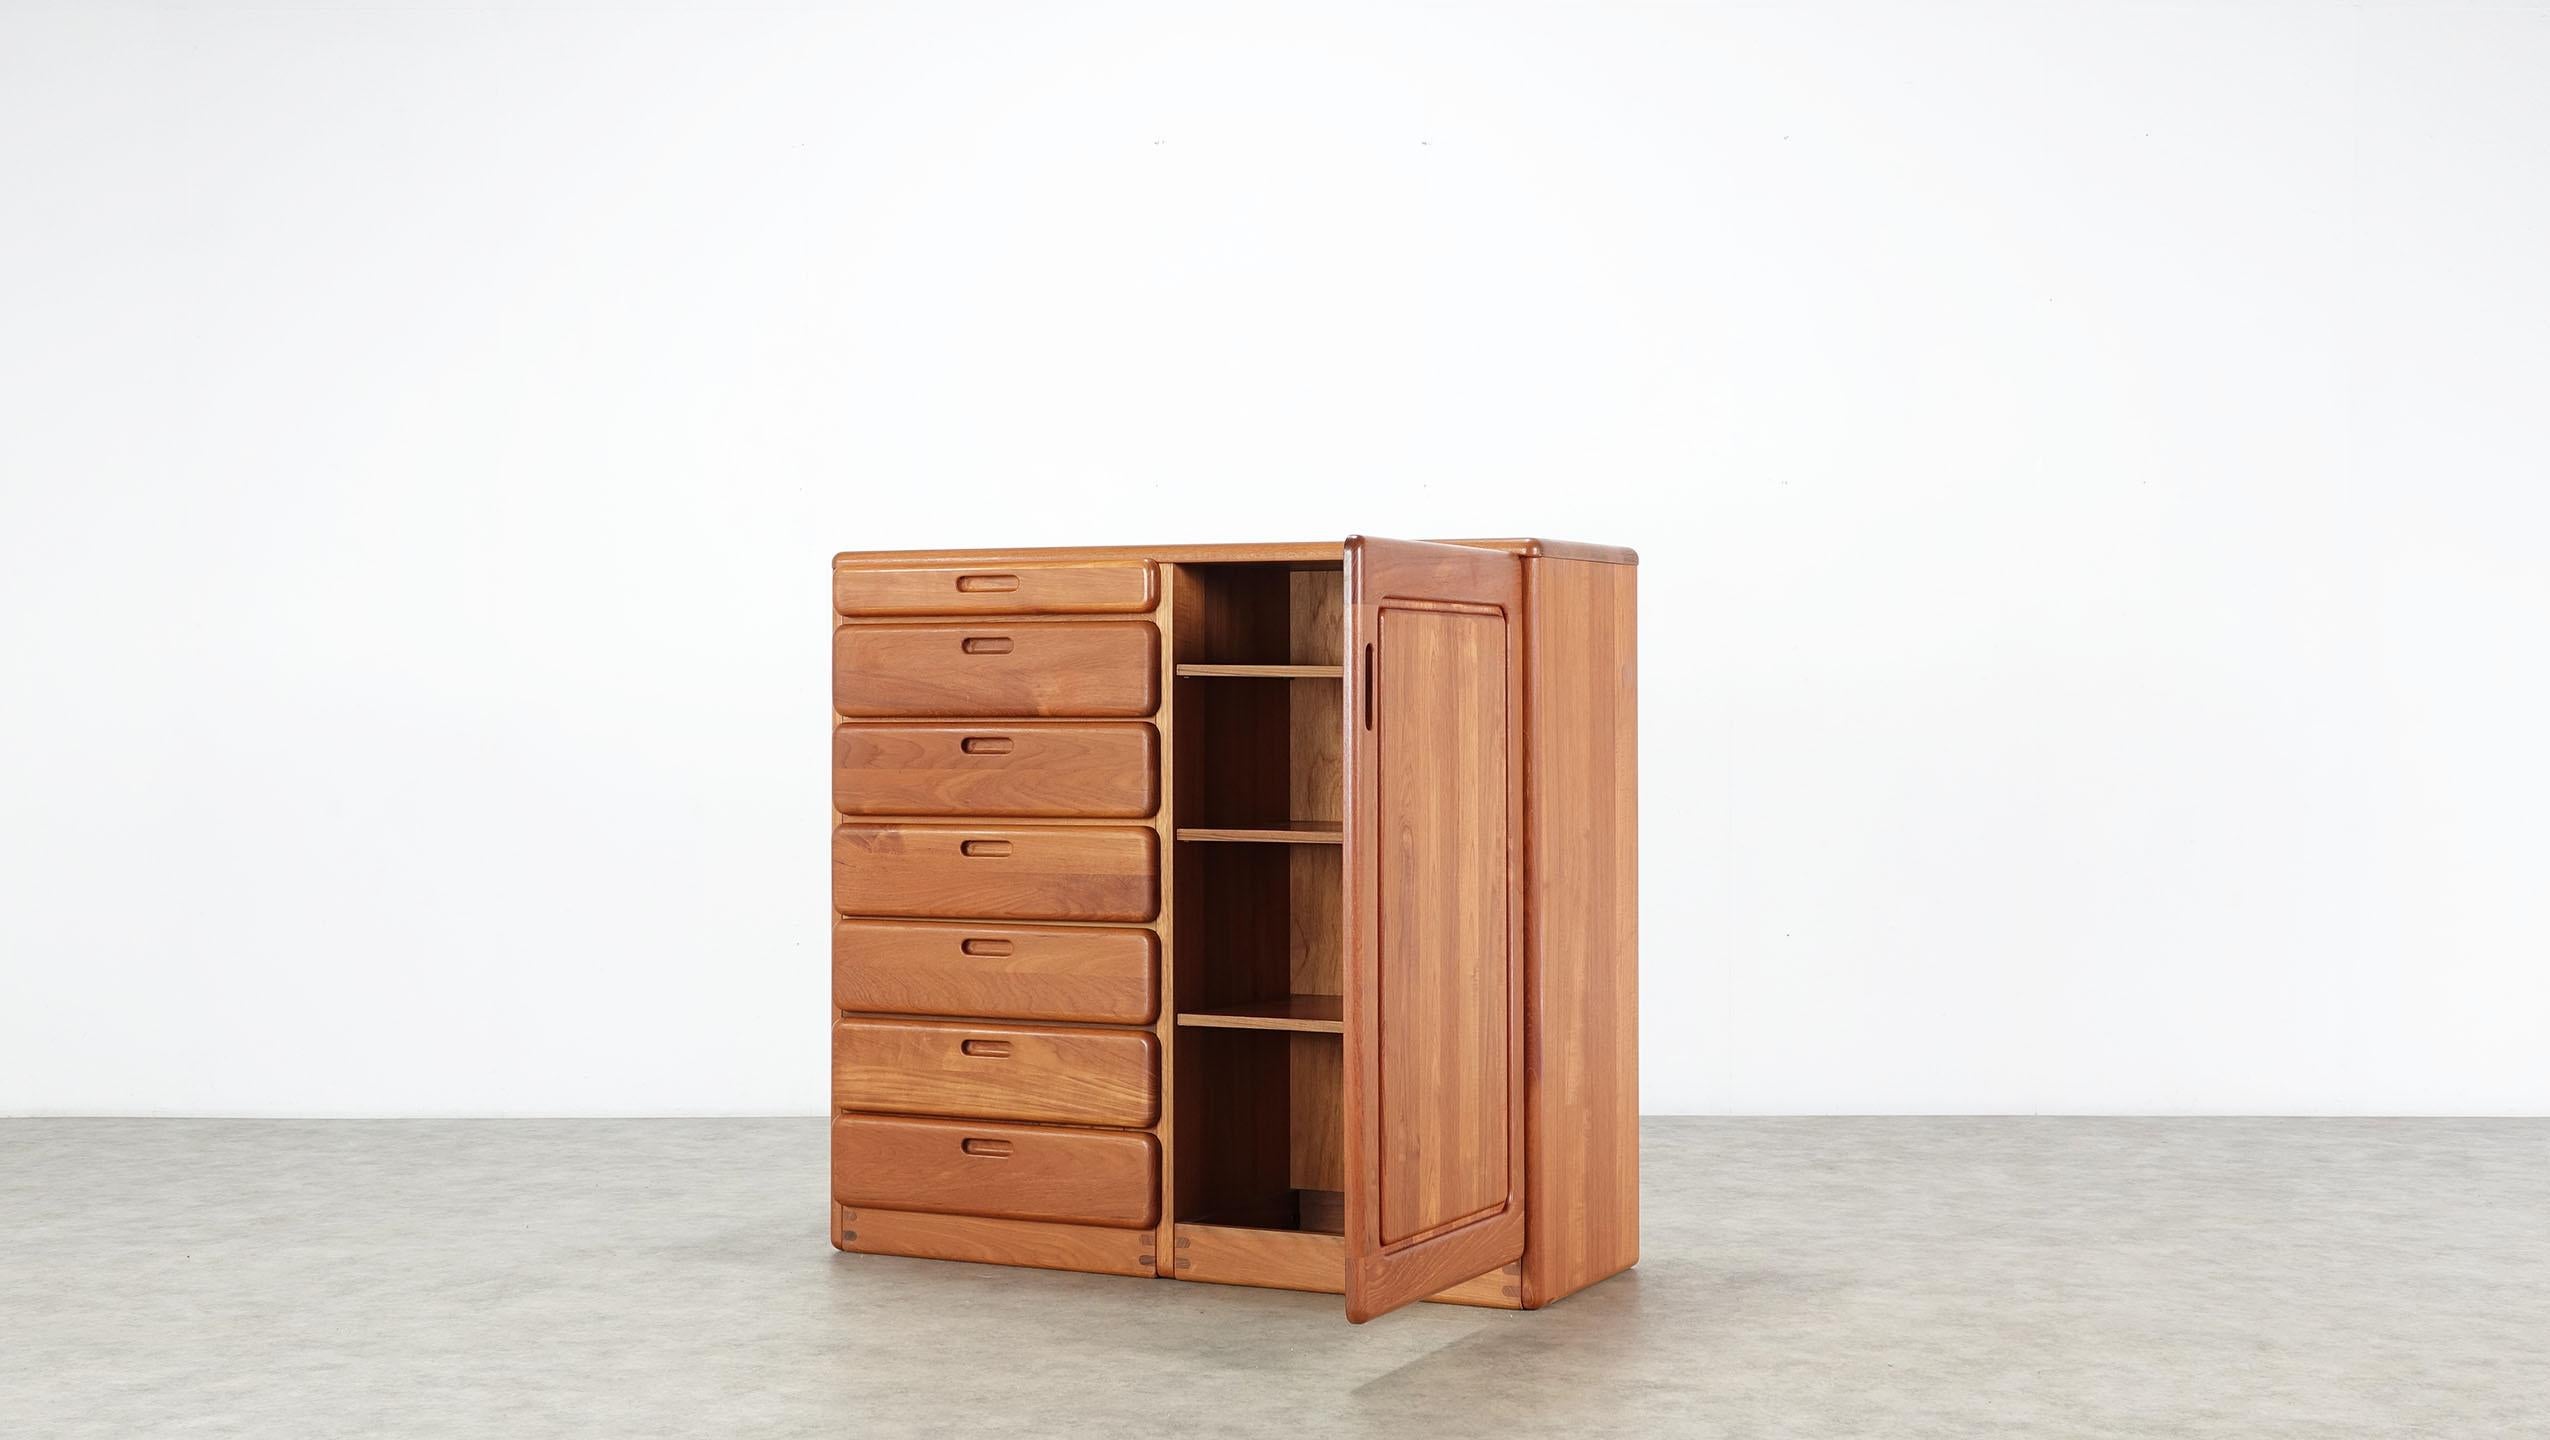 Late 20th Century Teak Chest with Drawers and Compartments Langeskov Møbelfabrik A / S Denmark For Sale